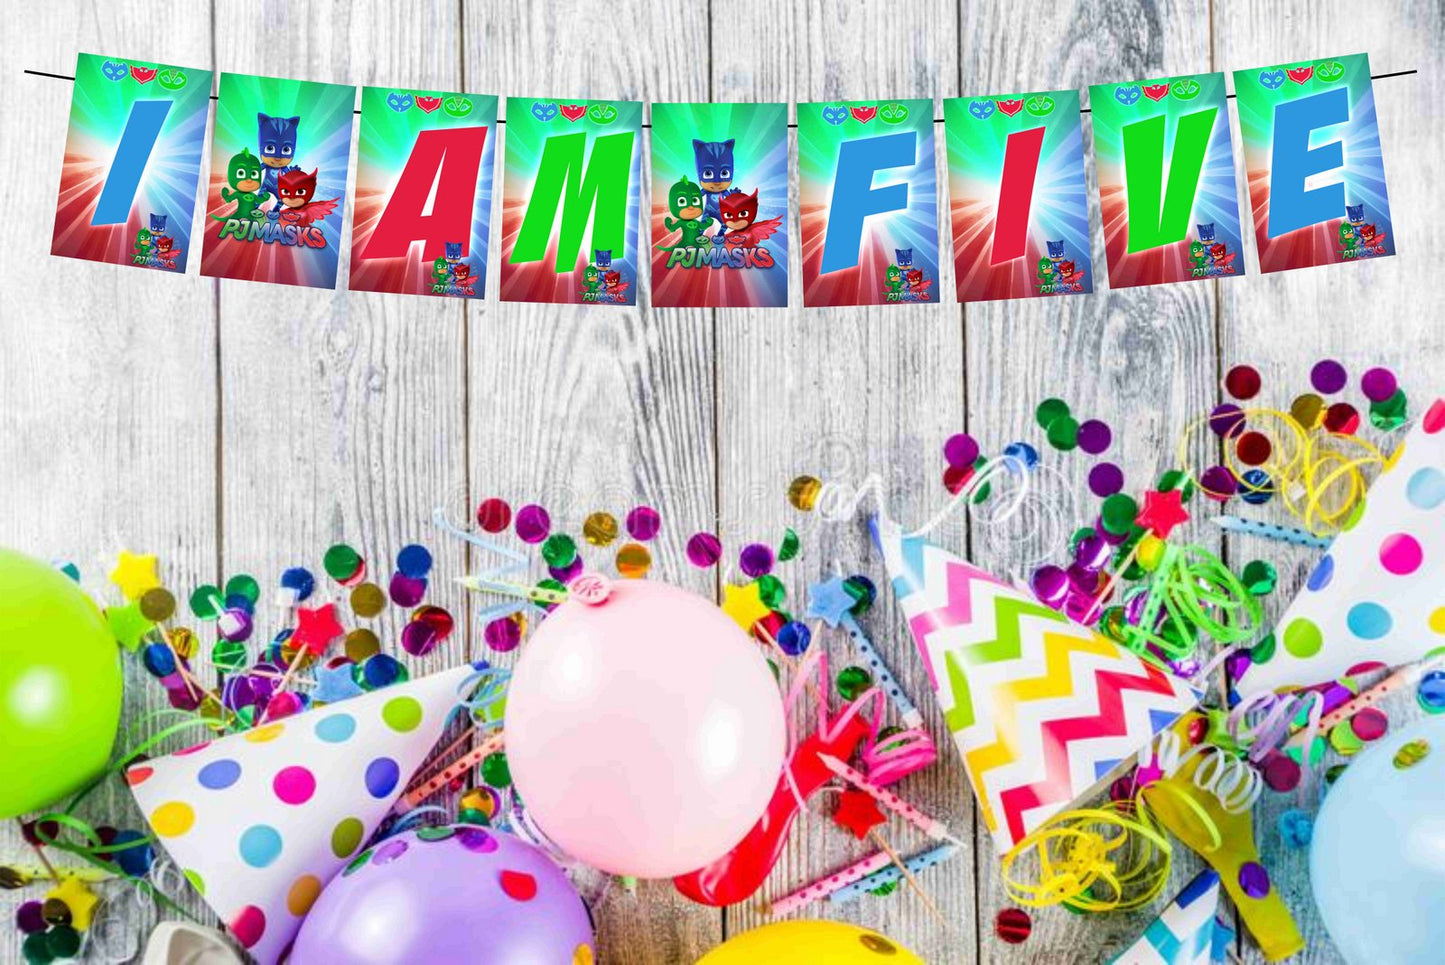 PJ Mask Theme I Am Five 5th Birthday Banner for Photo Shoot Backdrop and Theme Party